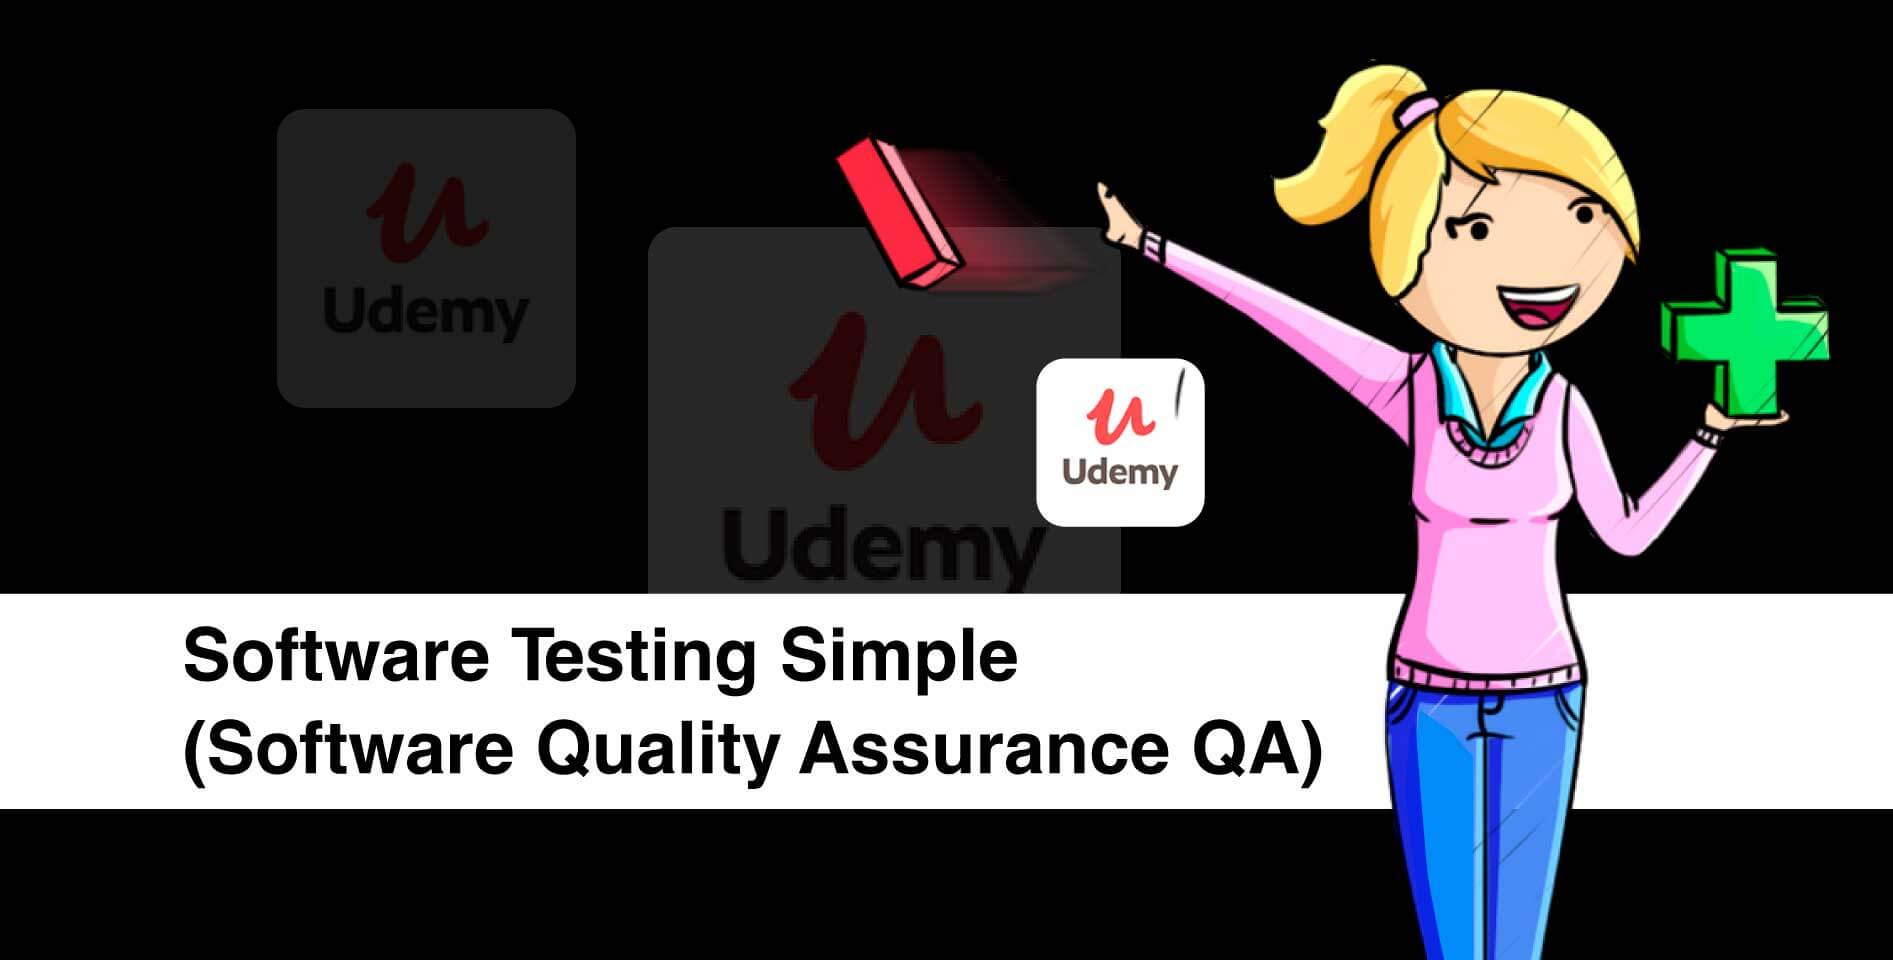 Udemy — Software Testing Simple (Software Quality Assurance QA)